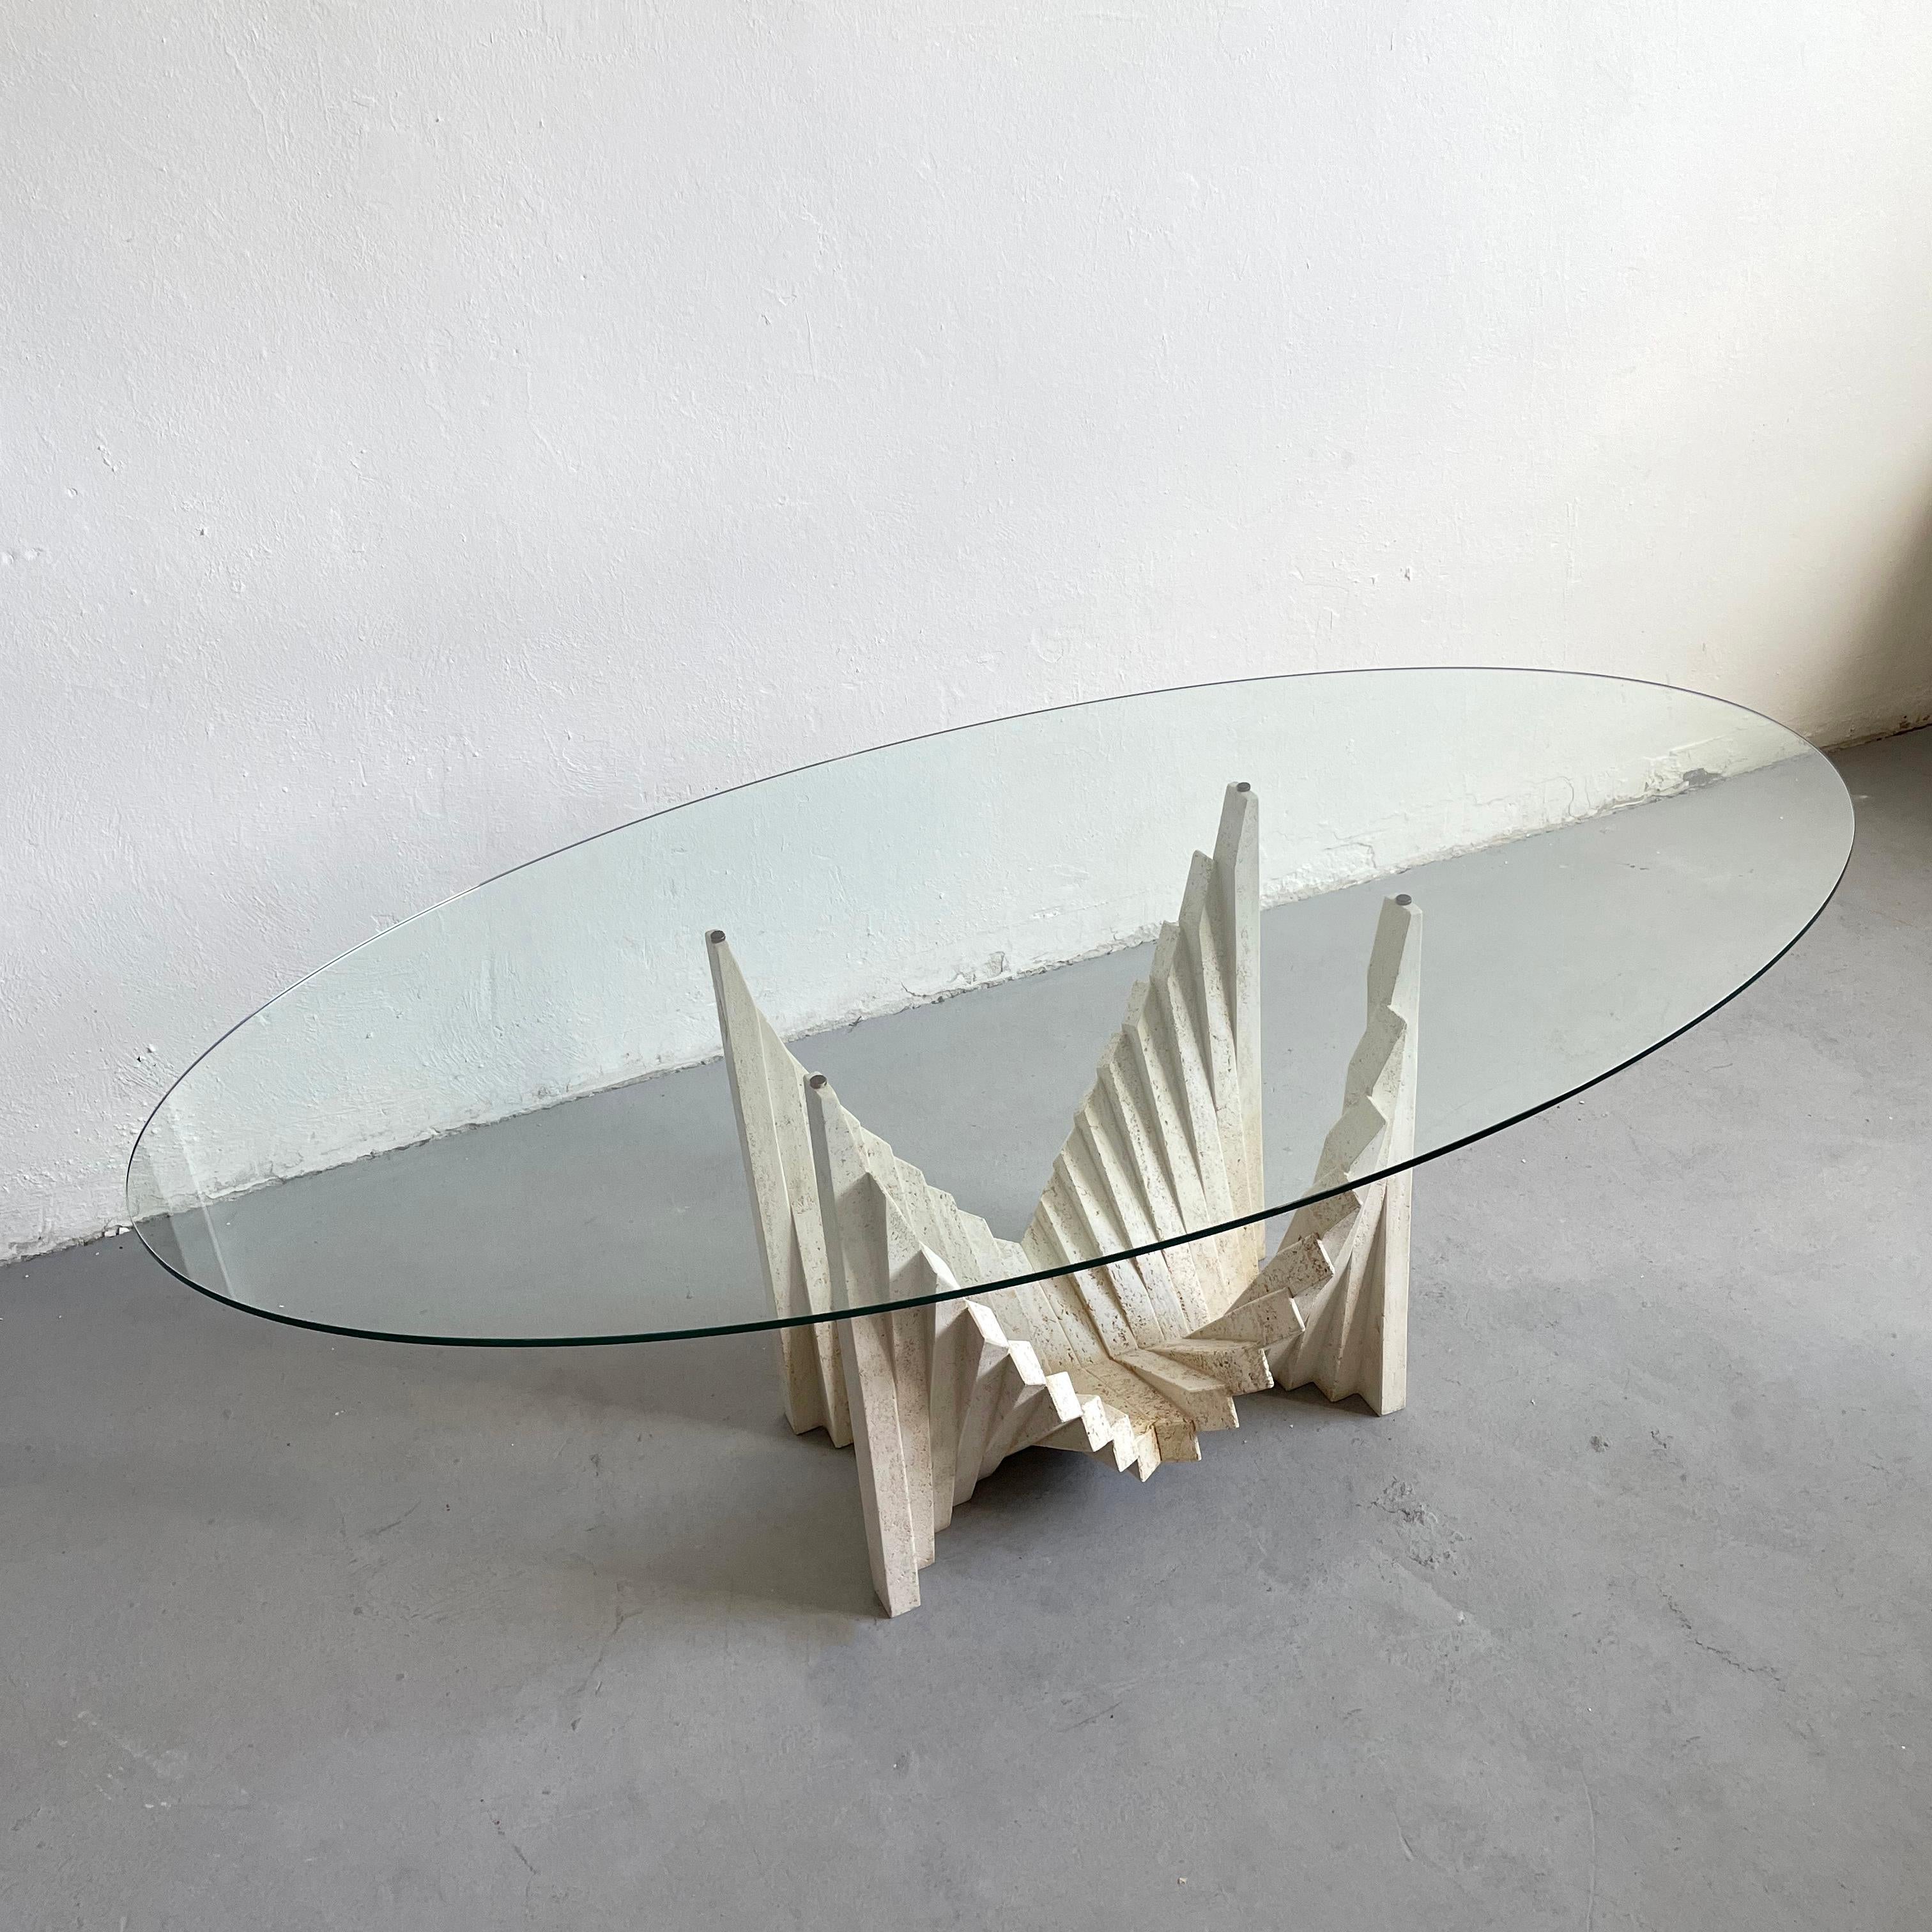 Sculptural Italian Brutalist Dining Table from the 1970s, Travertine and Glass 1